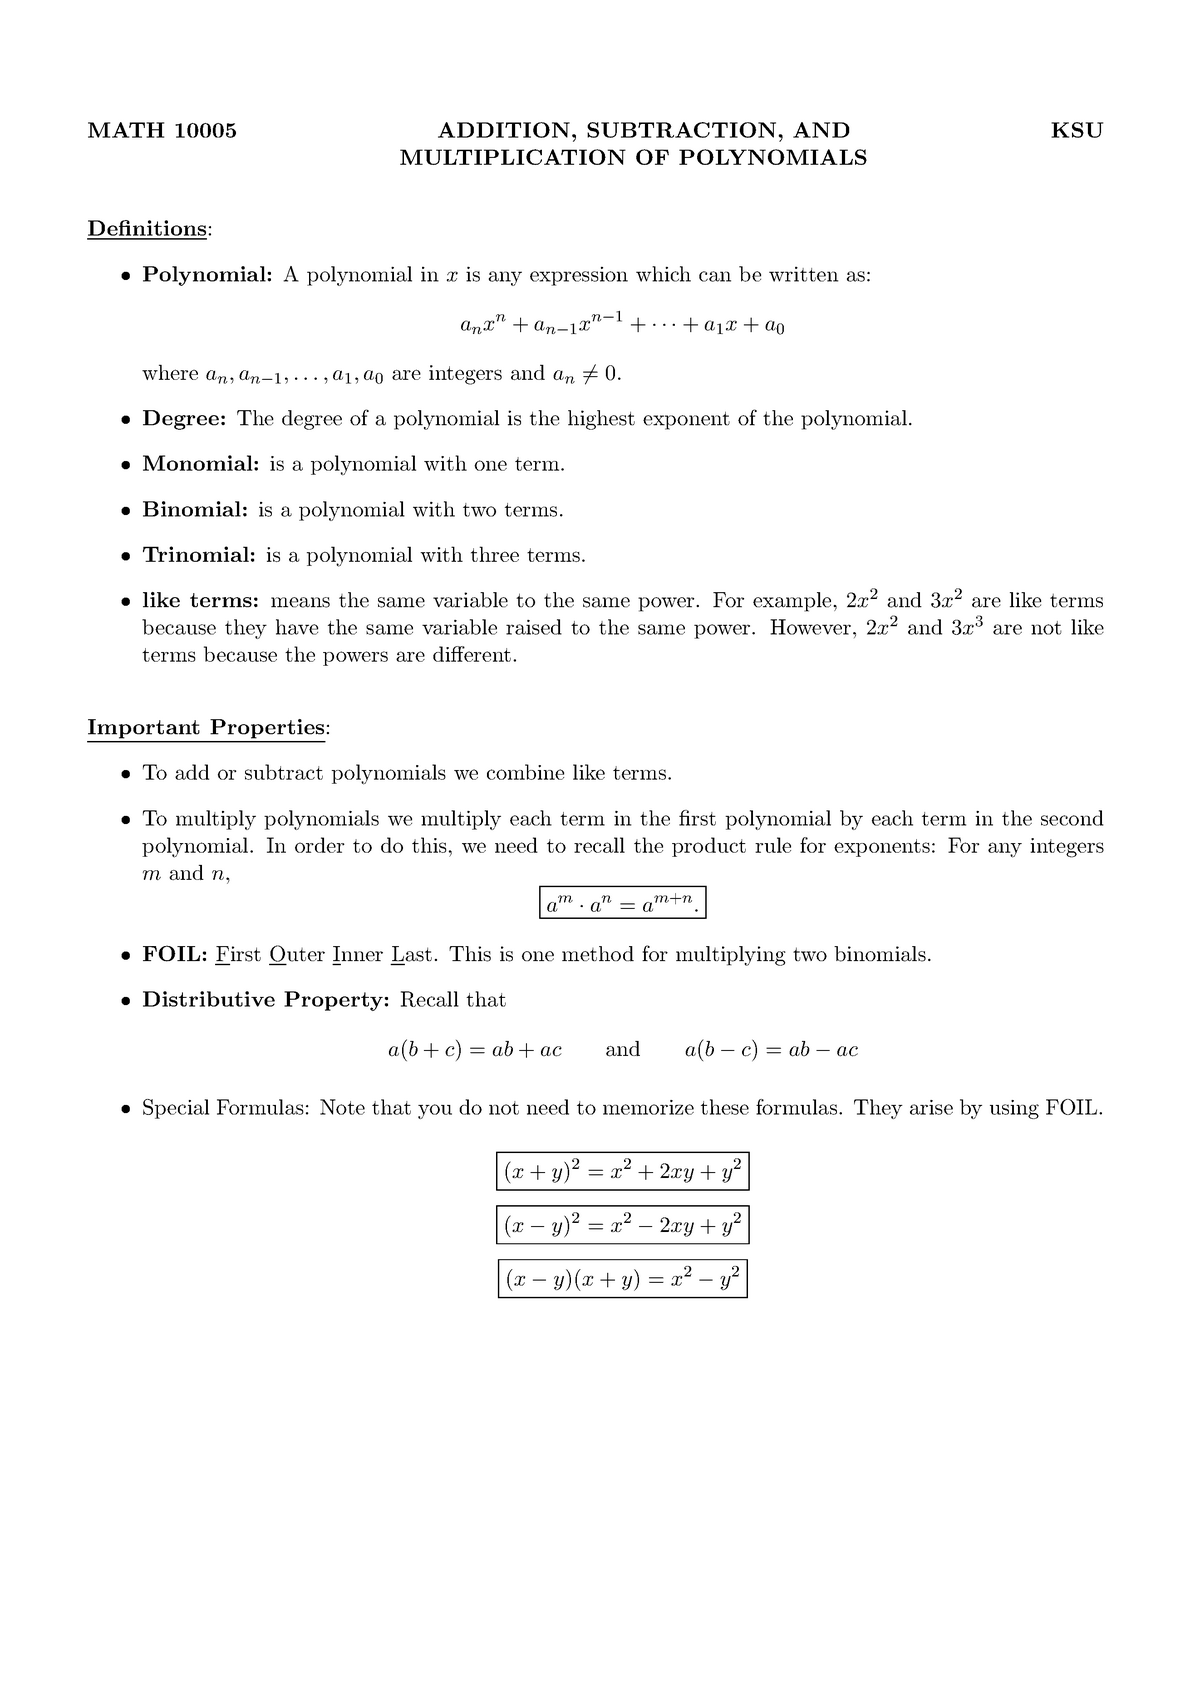 addition-subtraction-and-multiplication-of-polynomials-math-10005